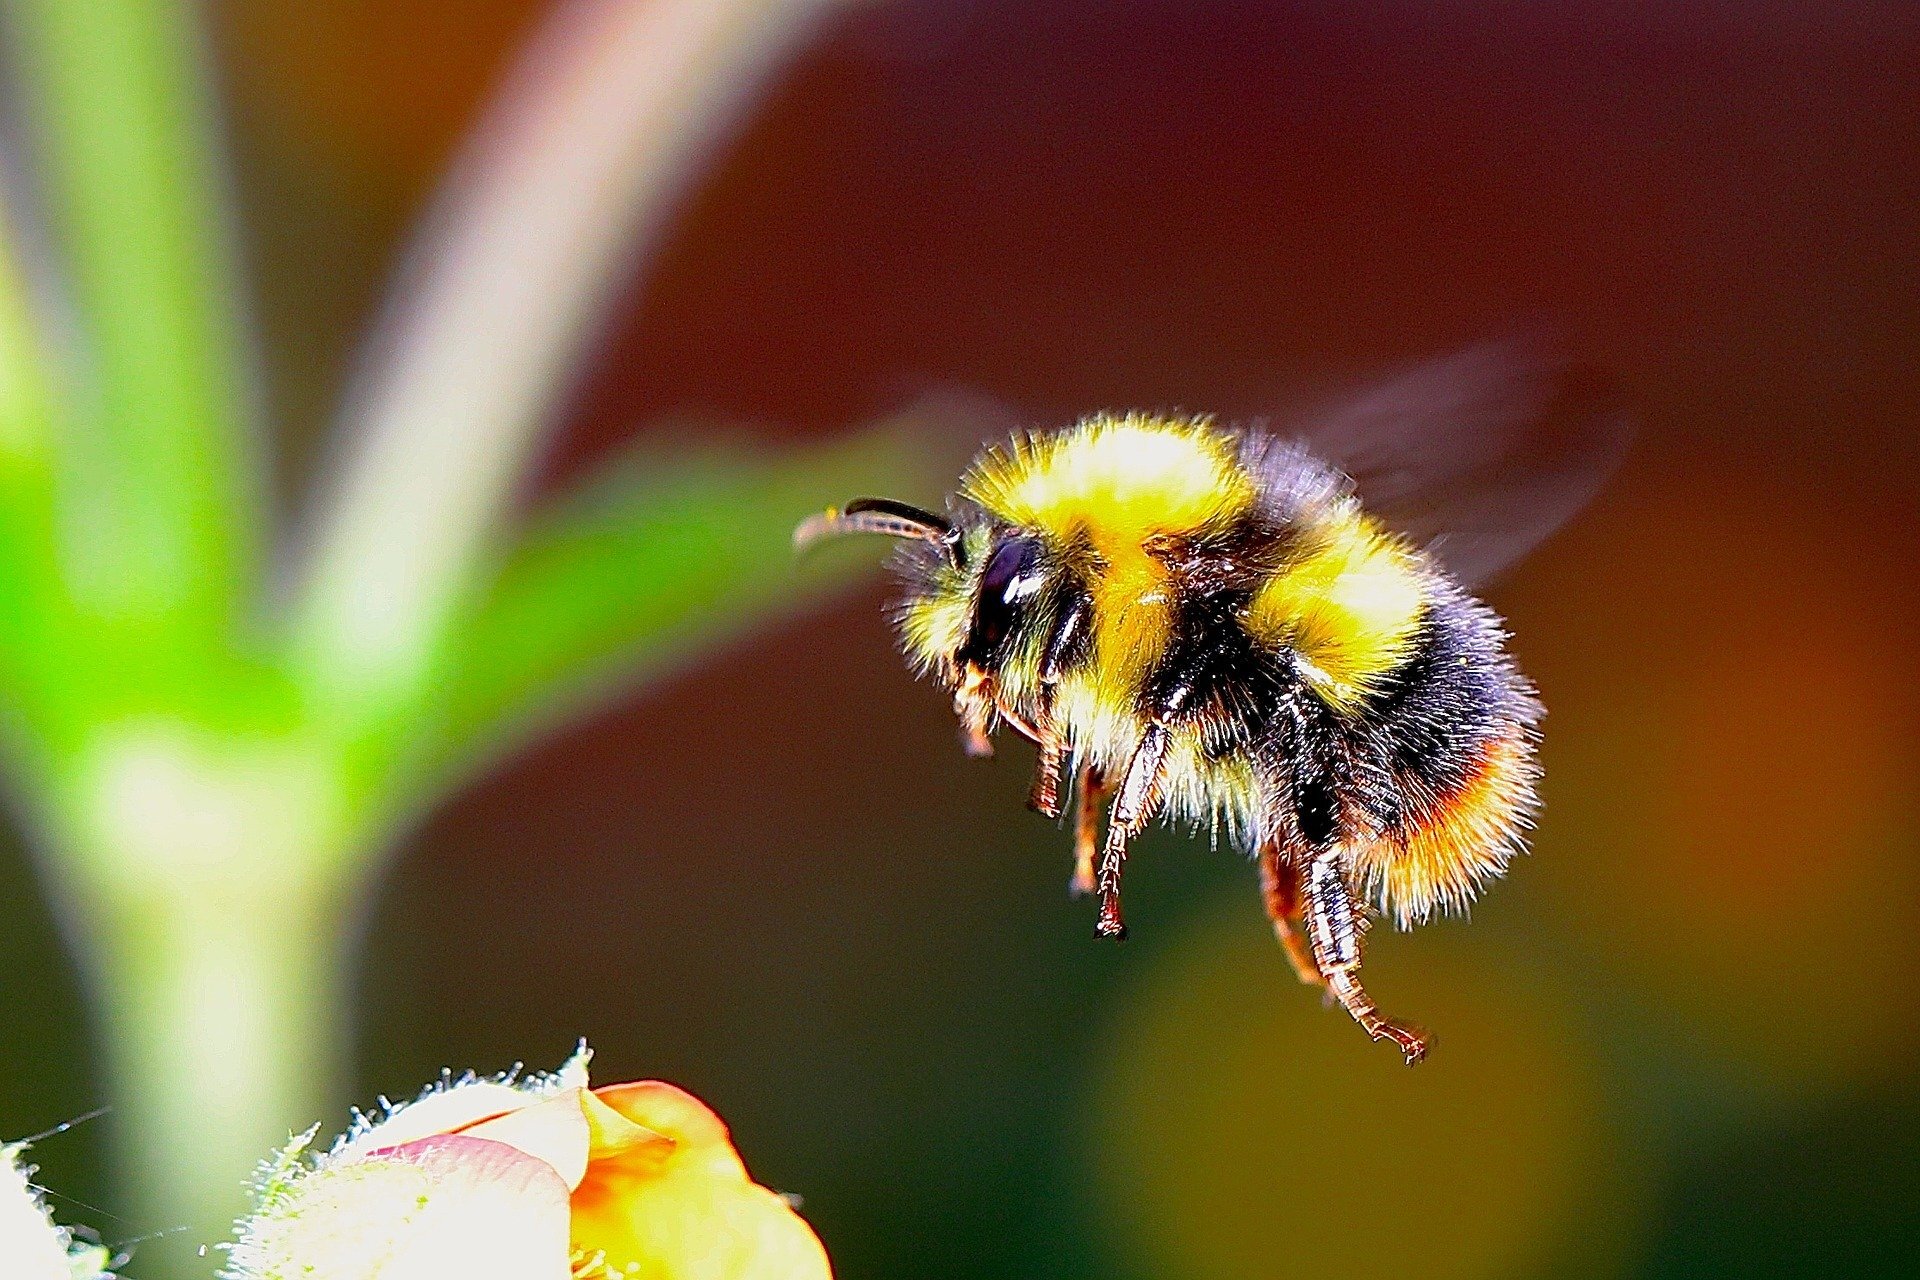 Lost Bumble Bees Rely on Scent to Navigate Back Home